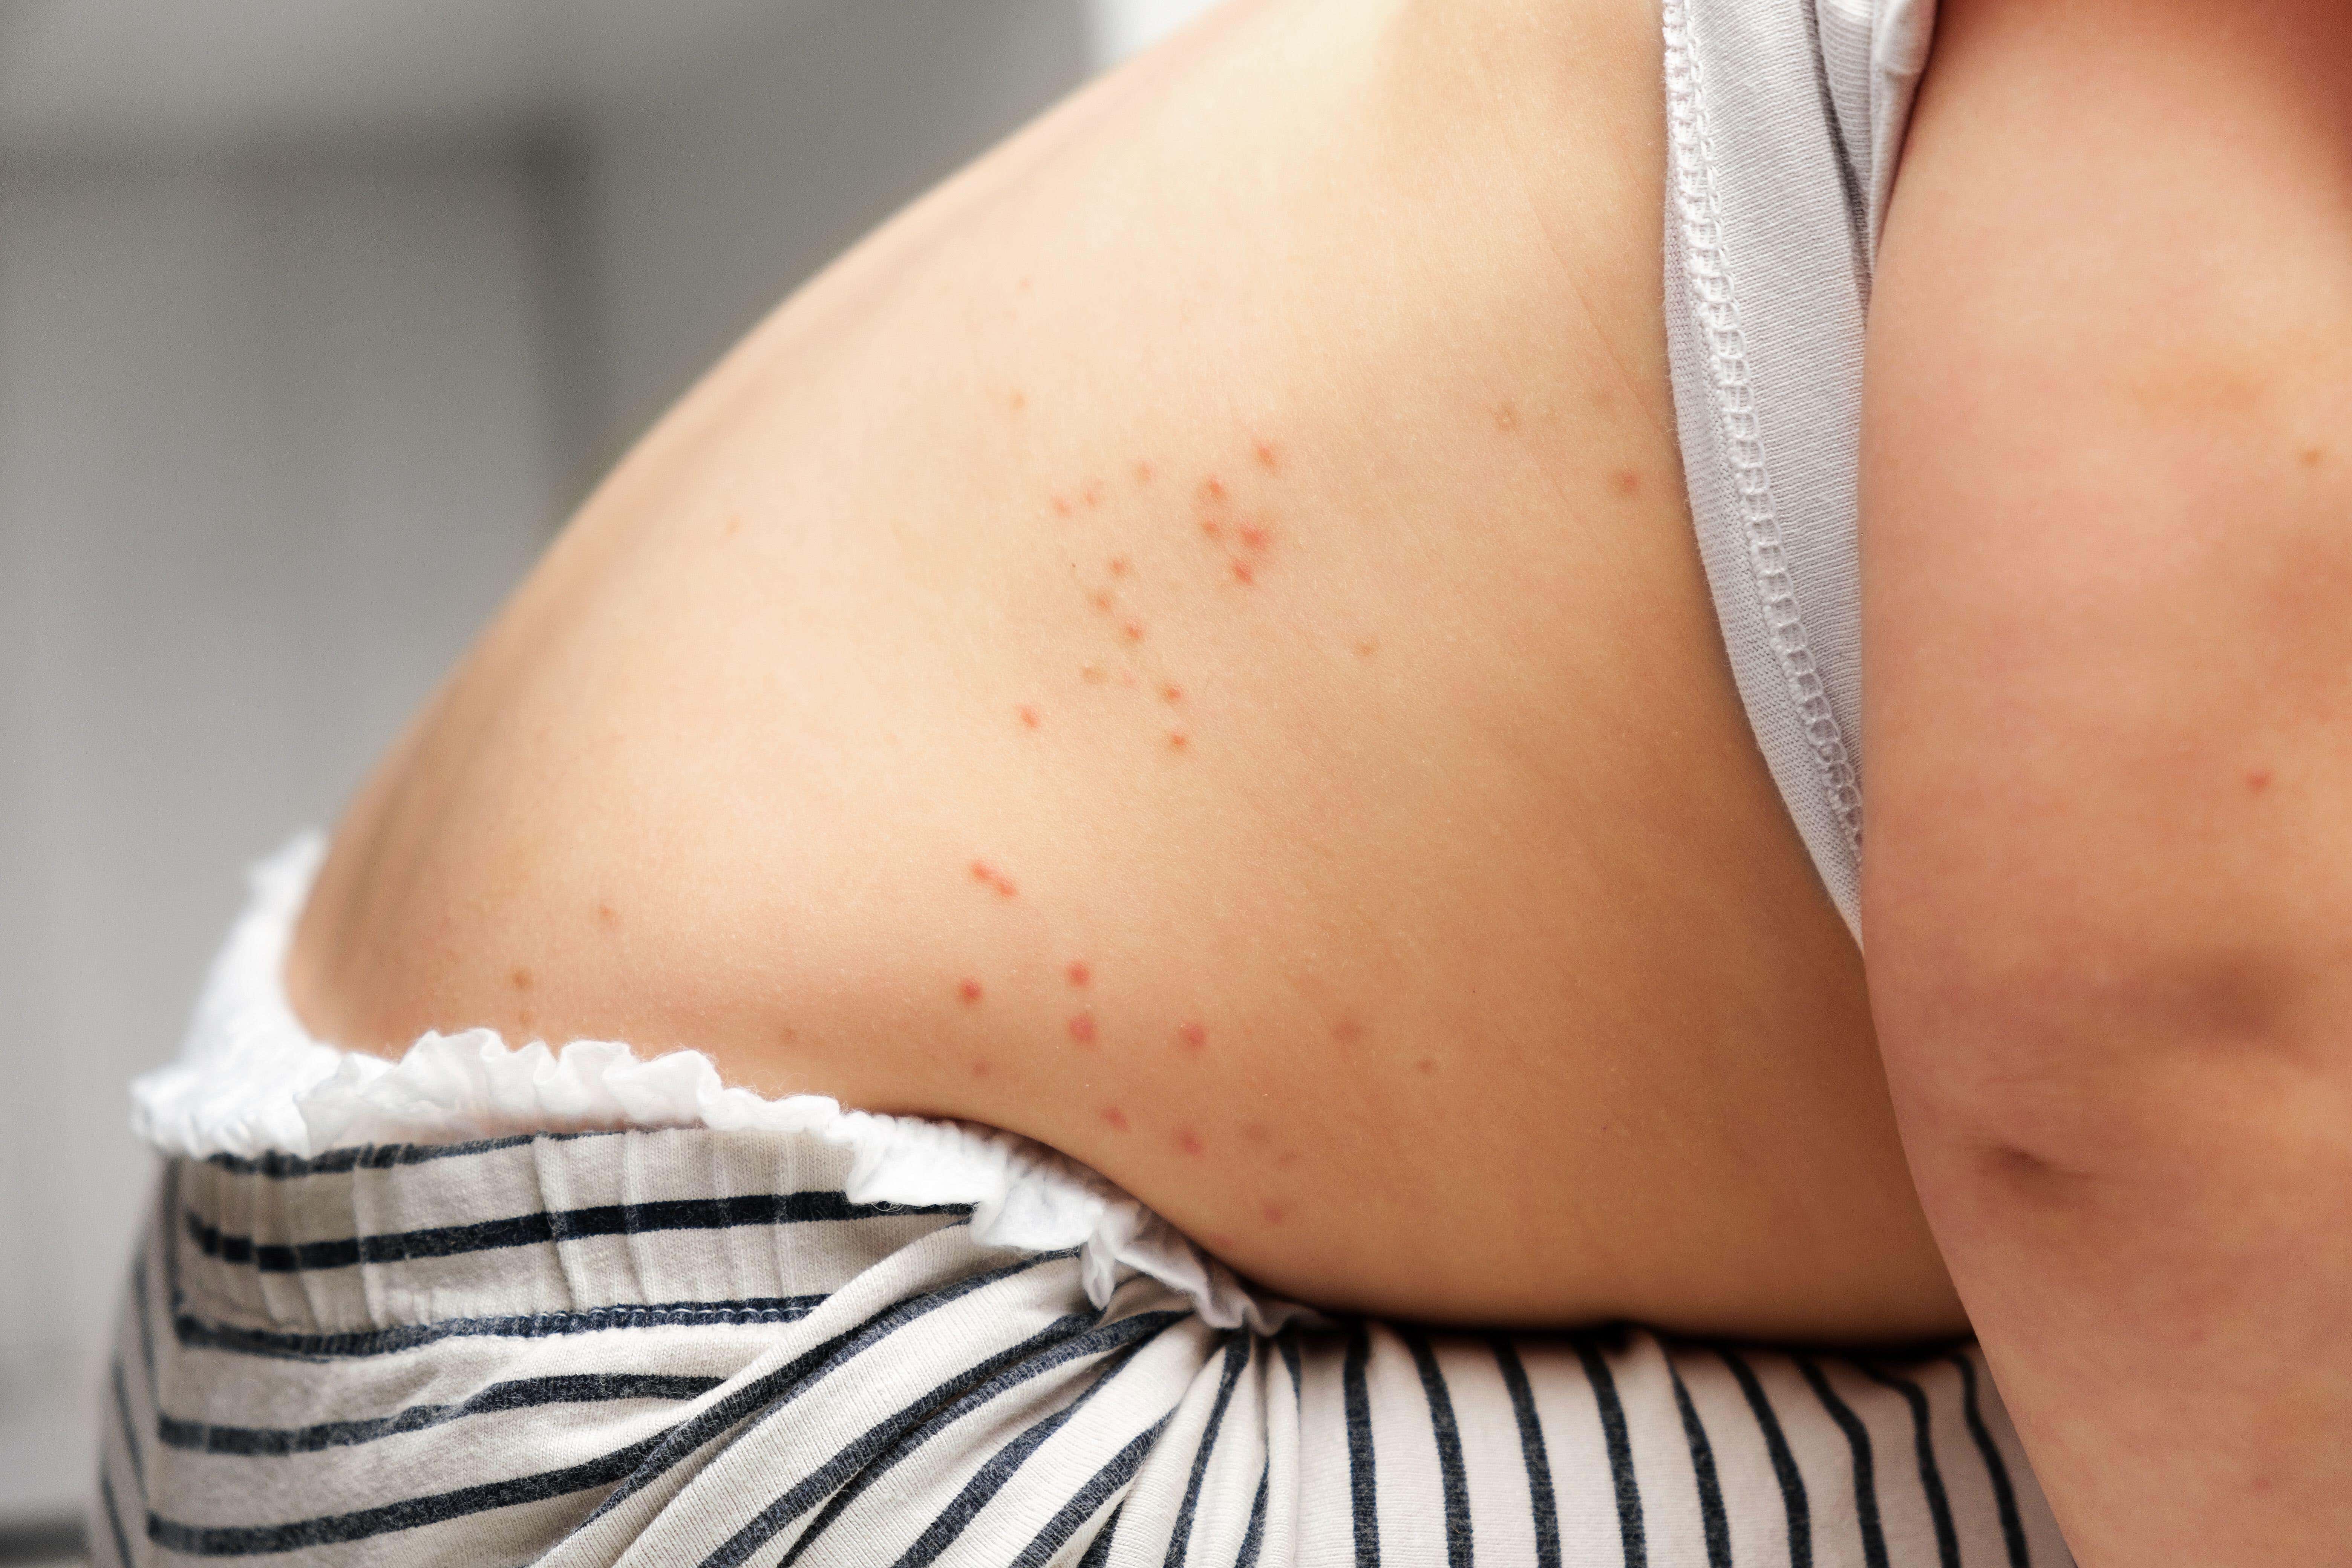 The chickenpox vaccine will help prevent cases of illness, the Joint Committee on Vaccination and Immunisation said